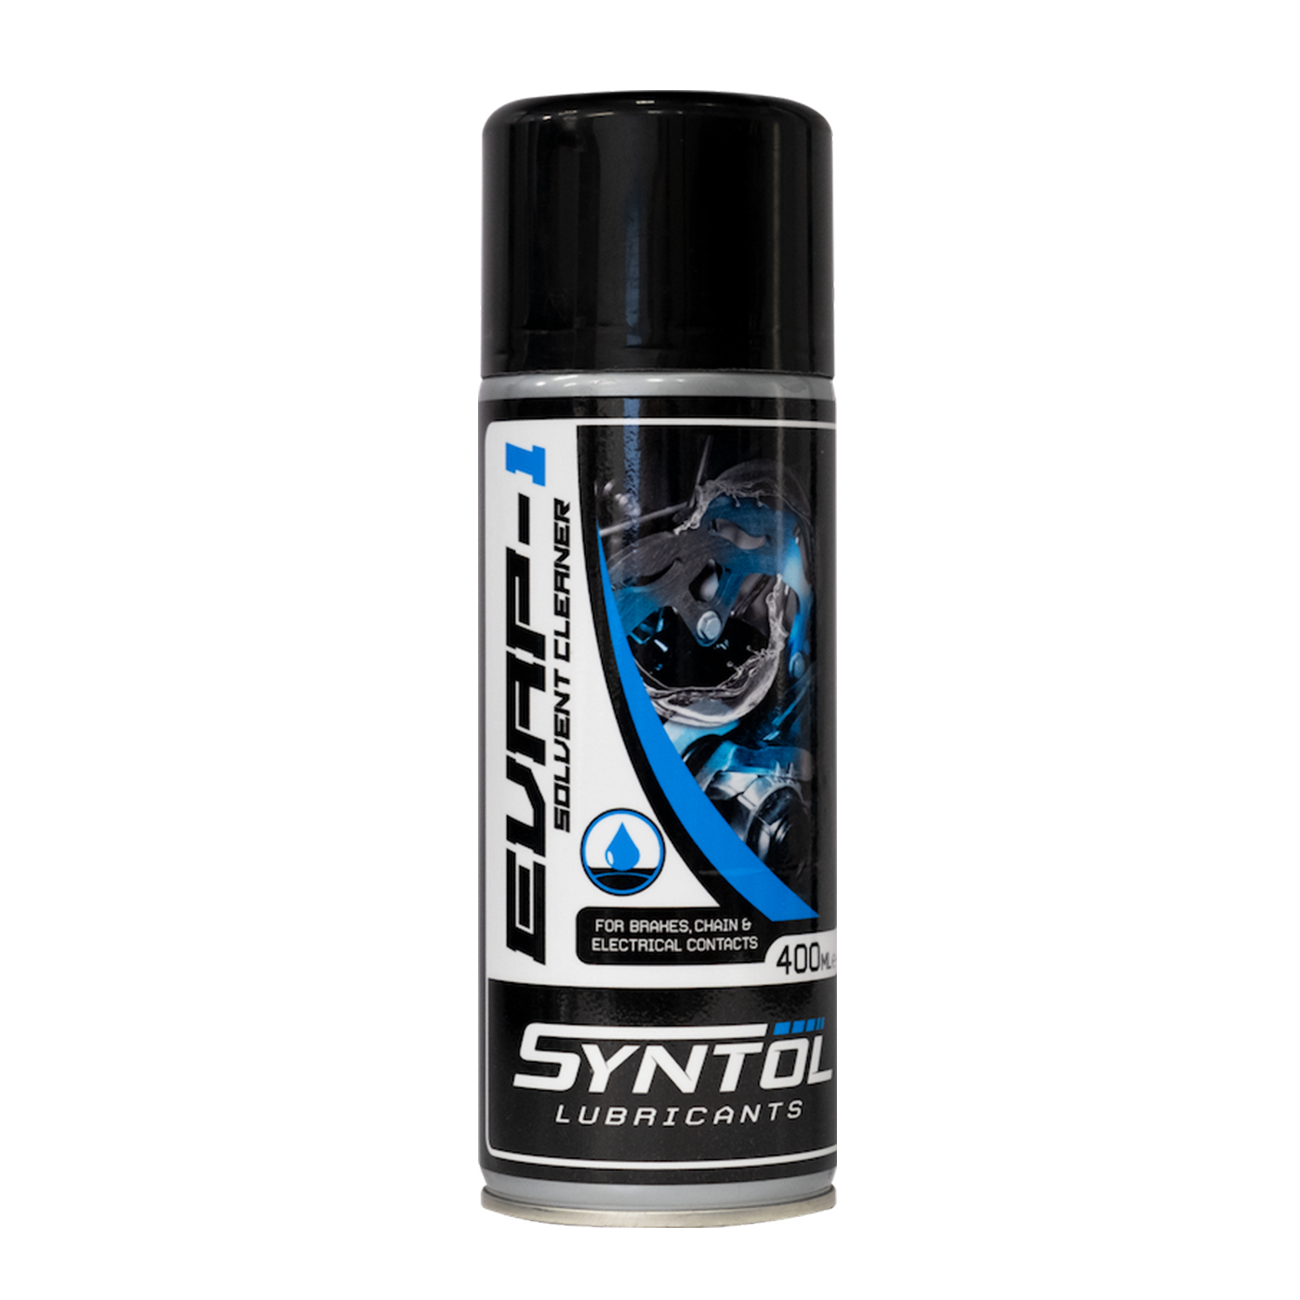 Syntol EVAP-1 Brake, Carb & Contact Cleaner Aerosol - 400ML-F0089-400-Bike Care-Pyramid Motorcycle Accessories